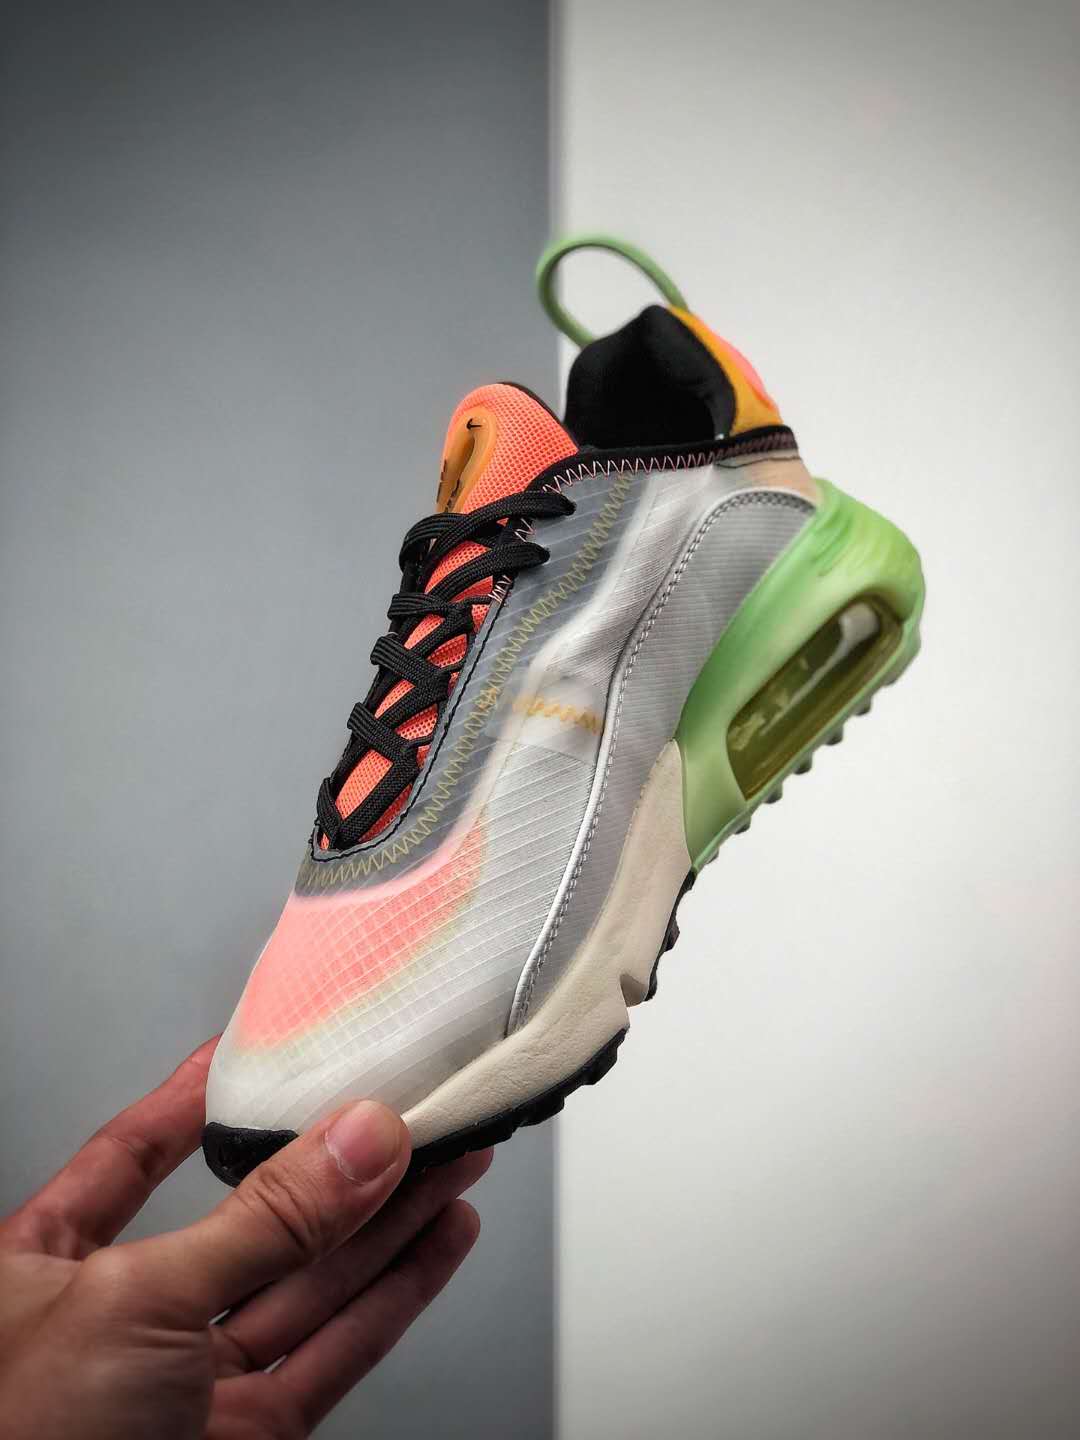 Nike Air Max 2090 'Vapor Green Pink' CZ3867-100 - Shop Latest Release Today!